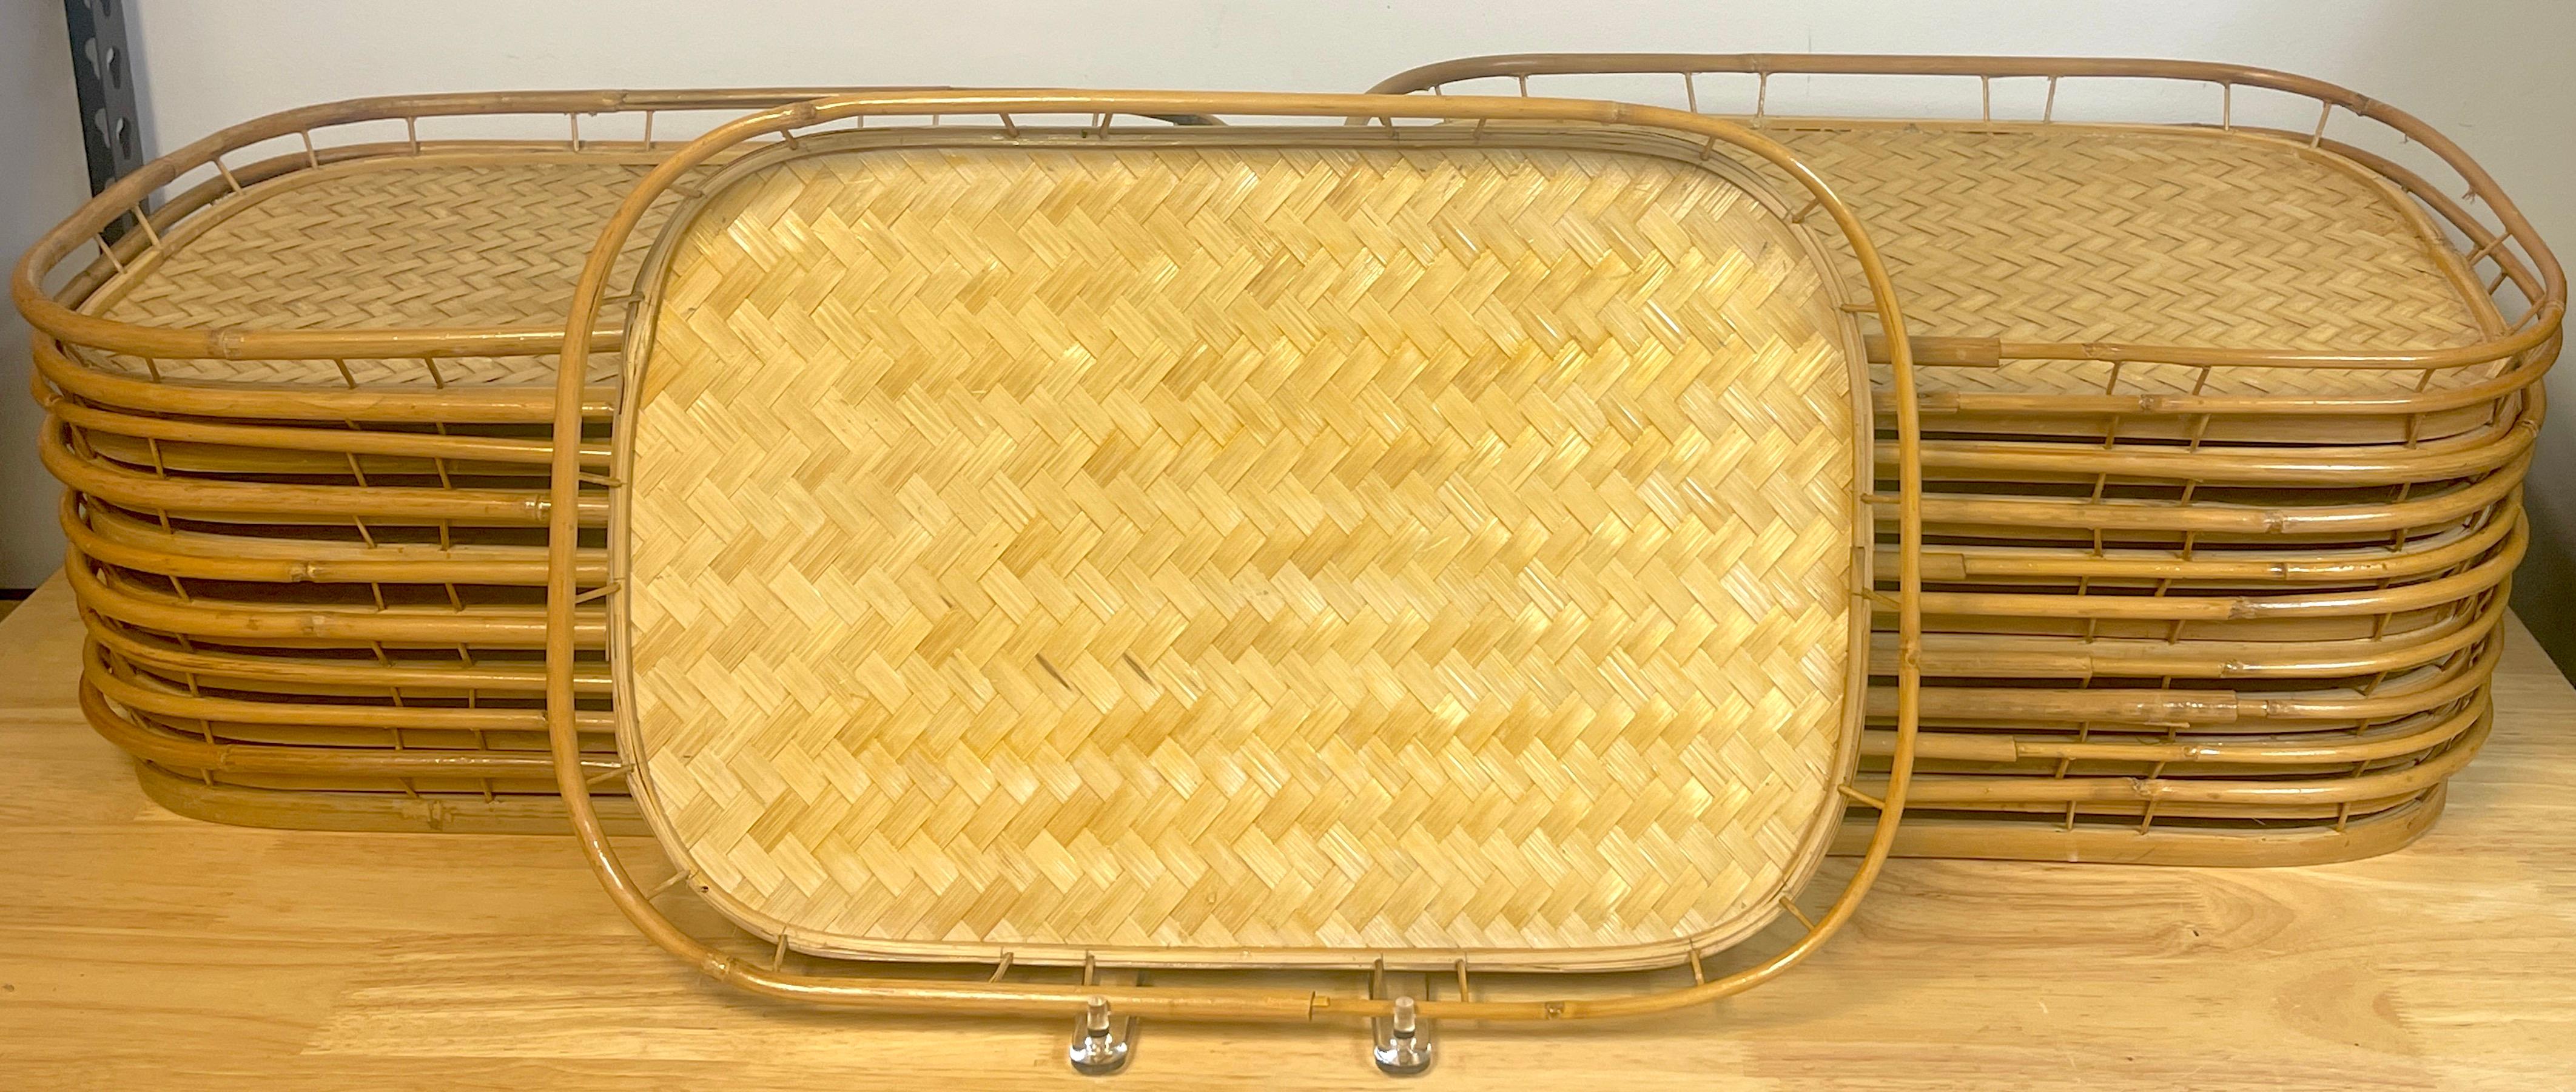 20 Canton Woven Bamboo Gallery trays, each one of woven and bent bamboo.

 